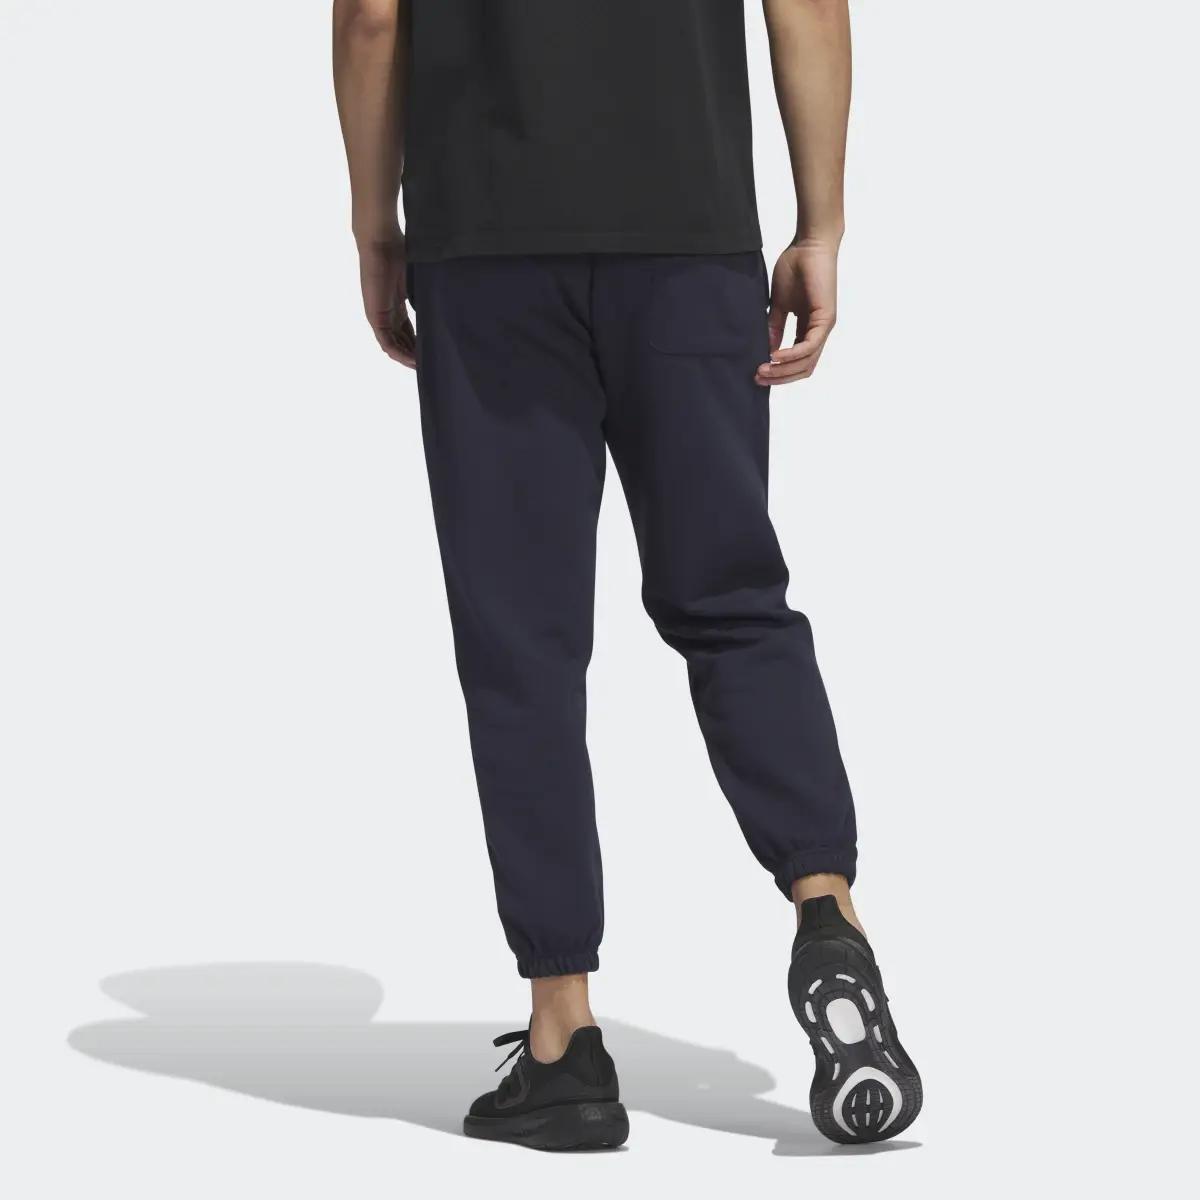 Adidas ALL SZN French Terry Pants. 2